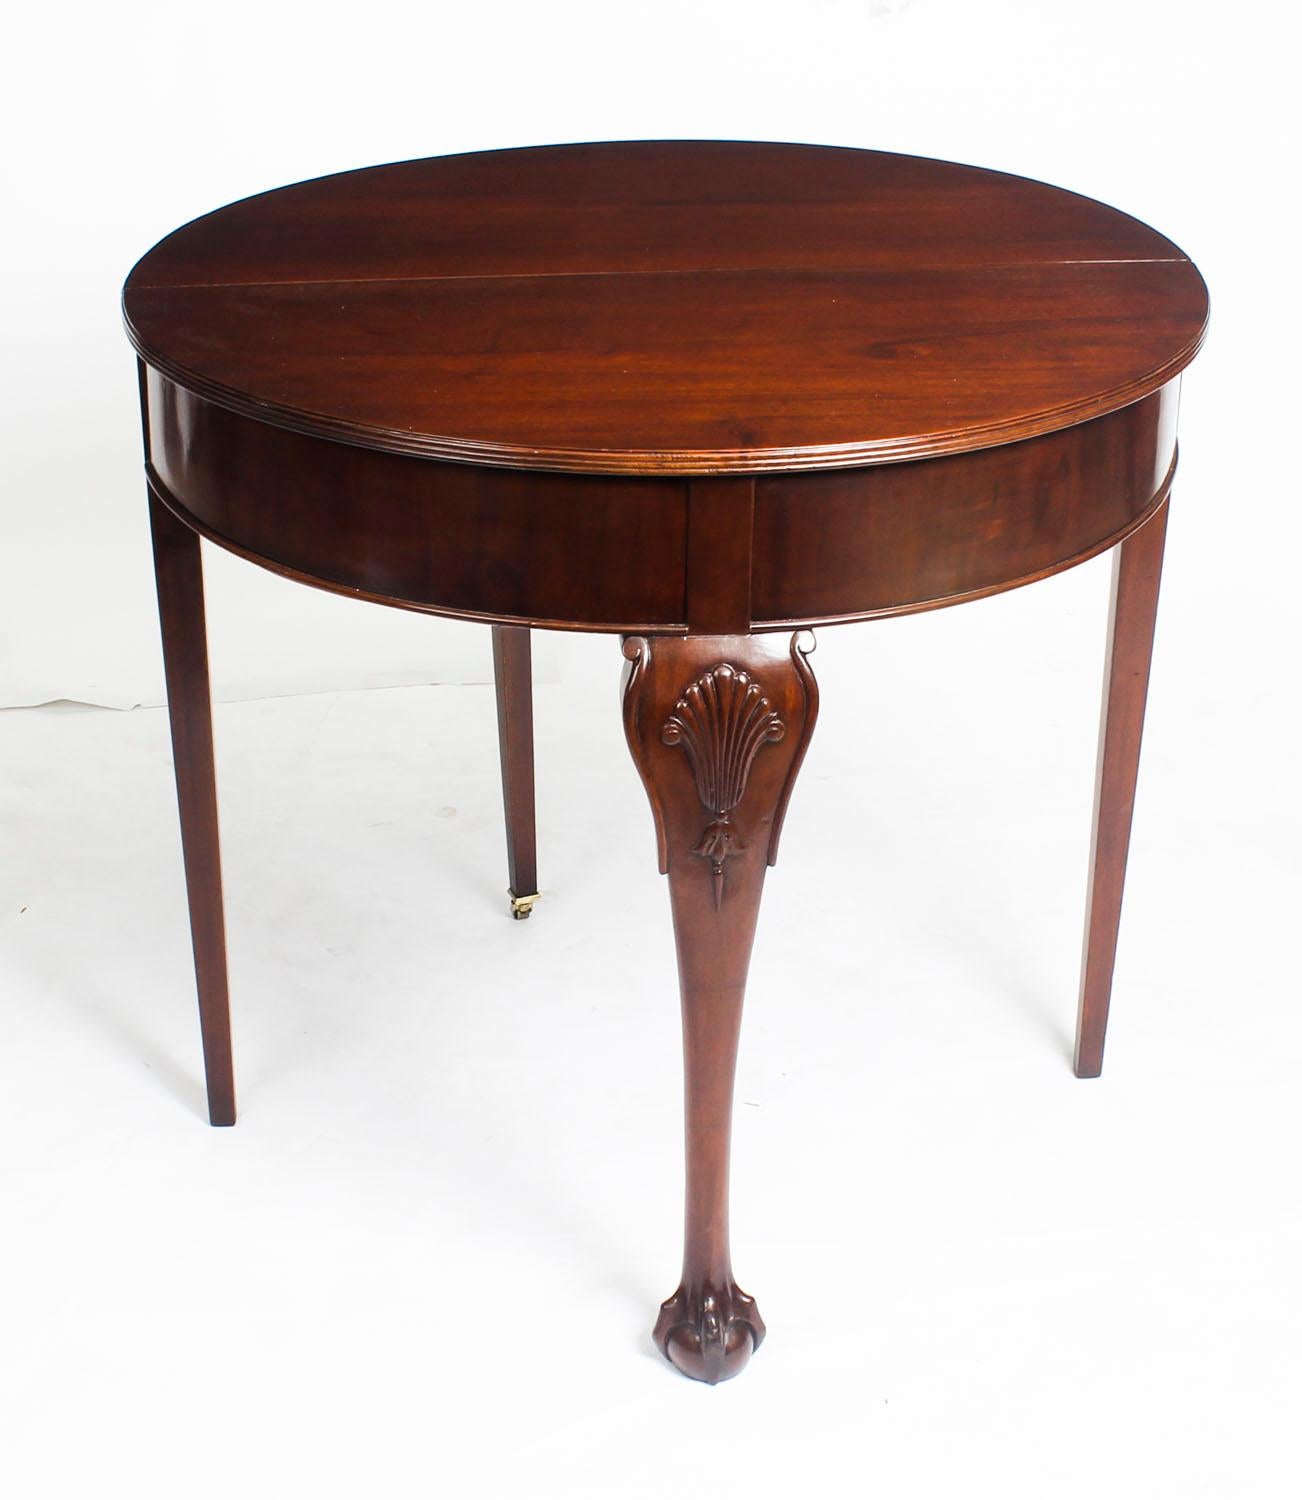 This is a beautiful antique Victorian mahogany demi lune side table, 19th century in date.

The table is made of solid mahogany with a moulded top above a plain frieze and is raised on a central cabriole leg and three square tapering legs. The